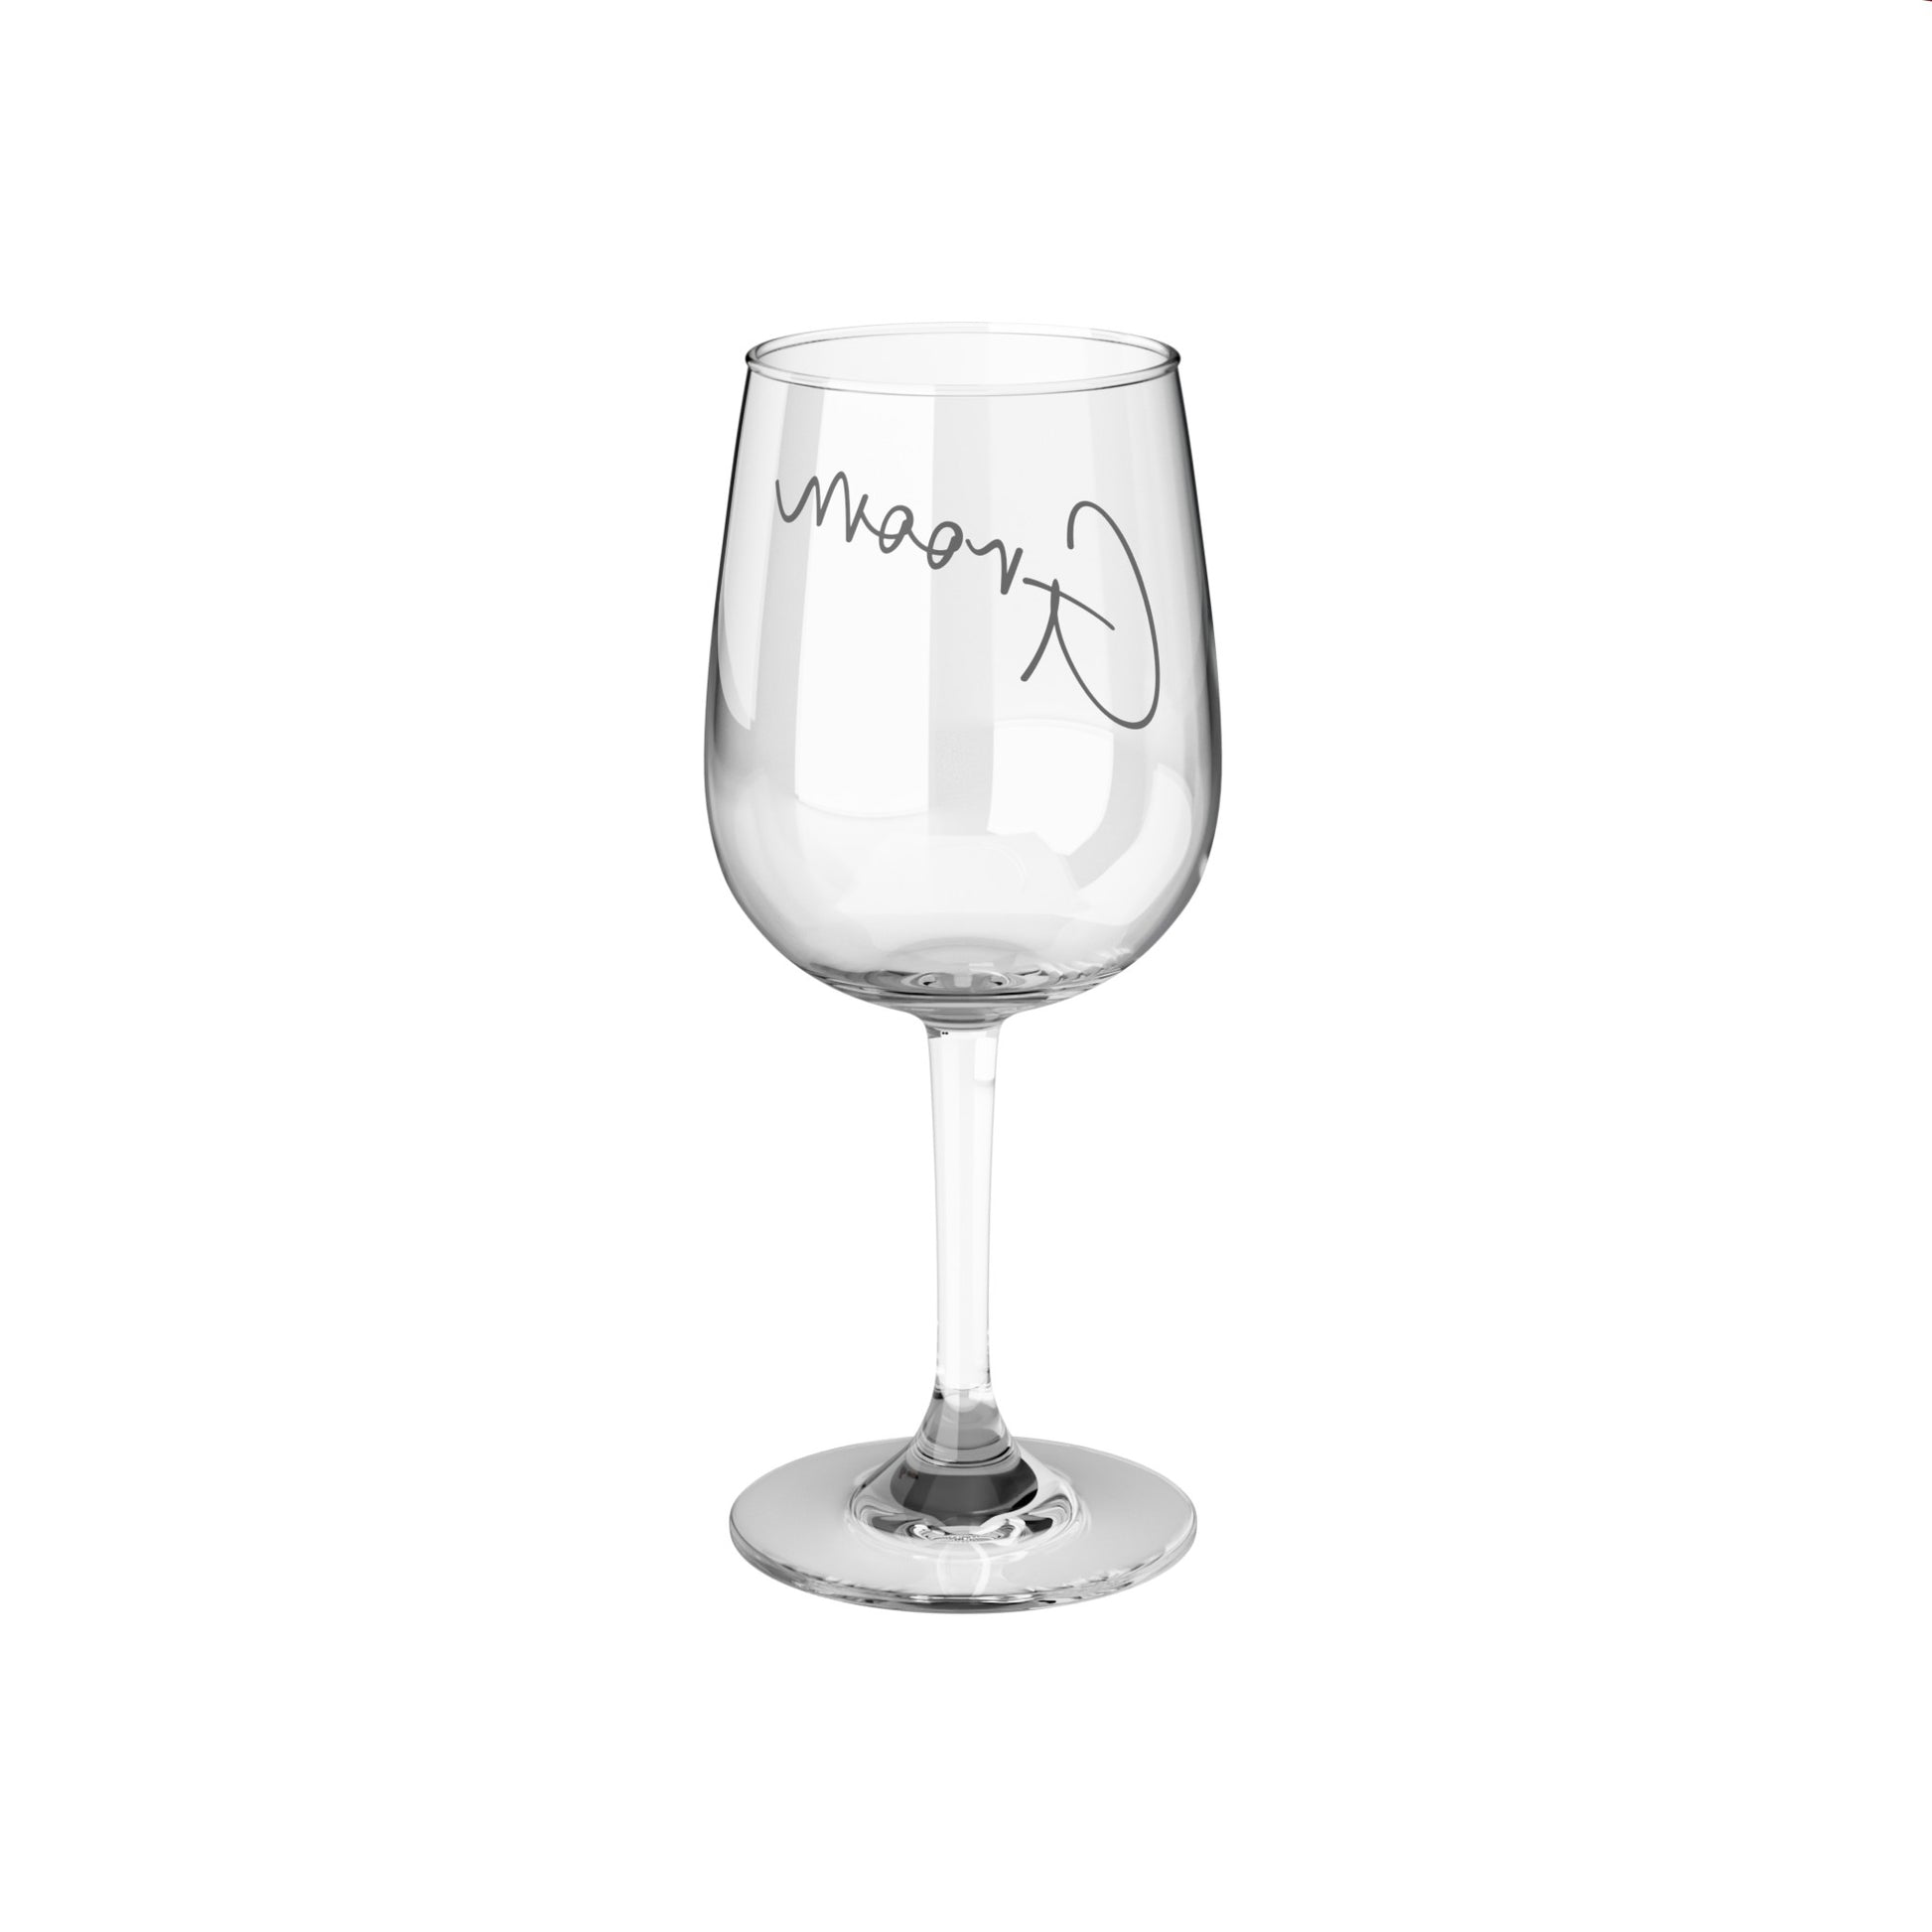 Wedding wine glass for groom, back view.